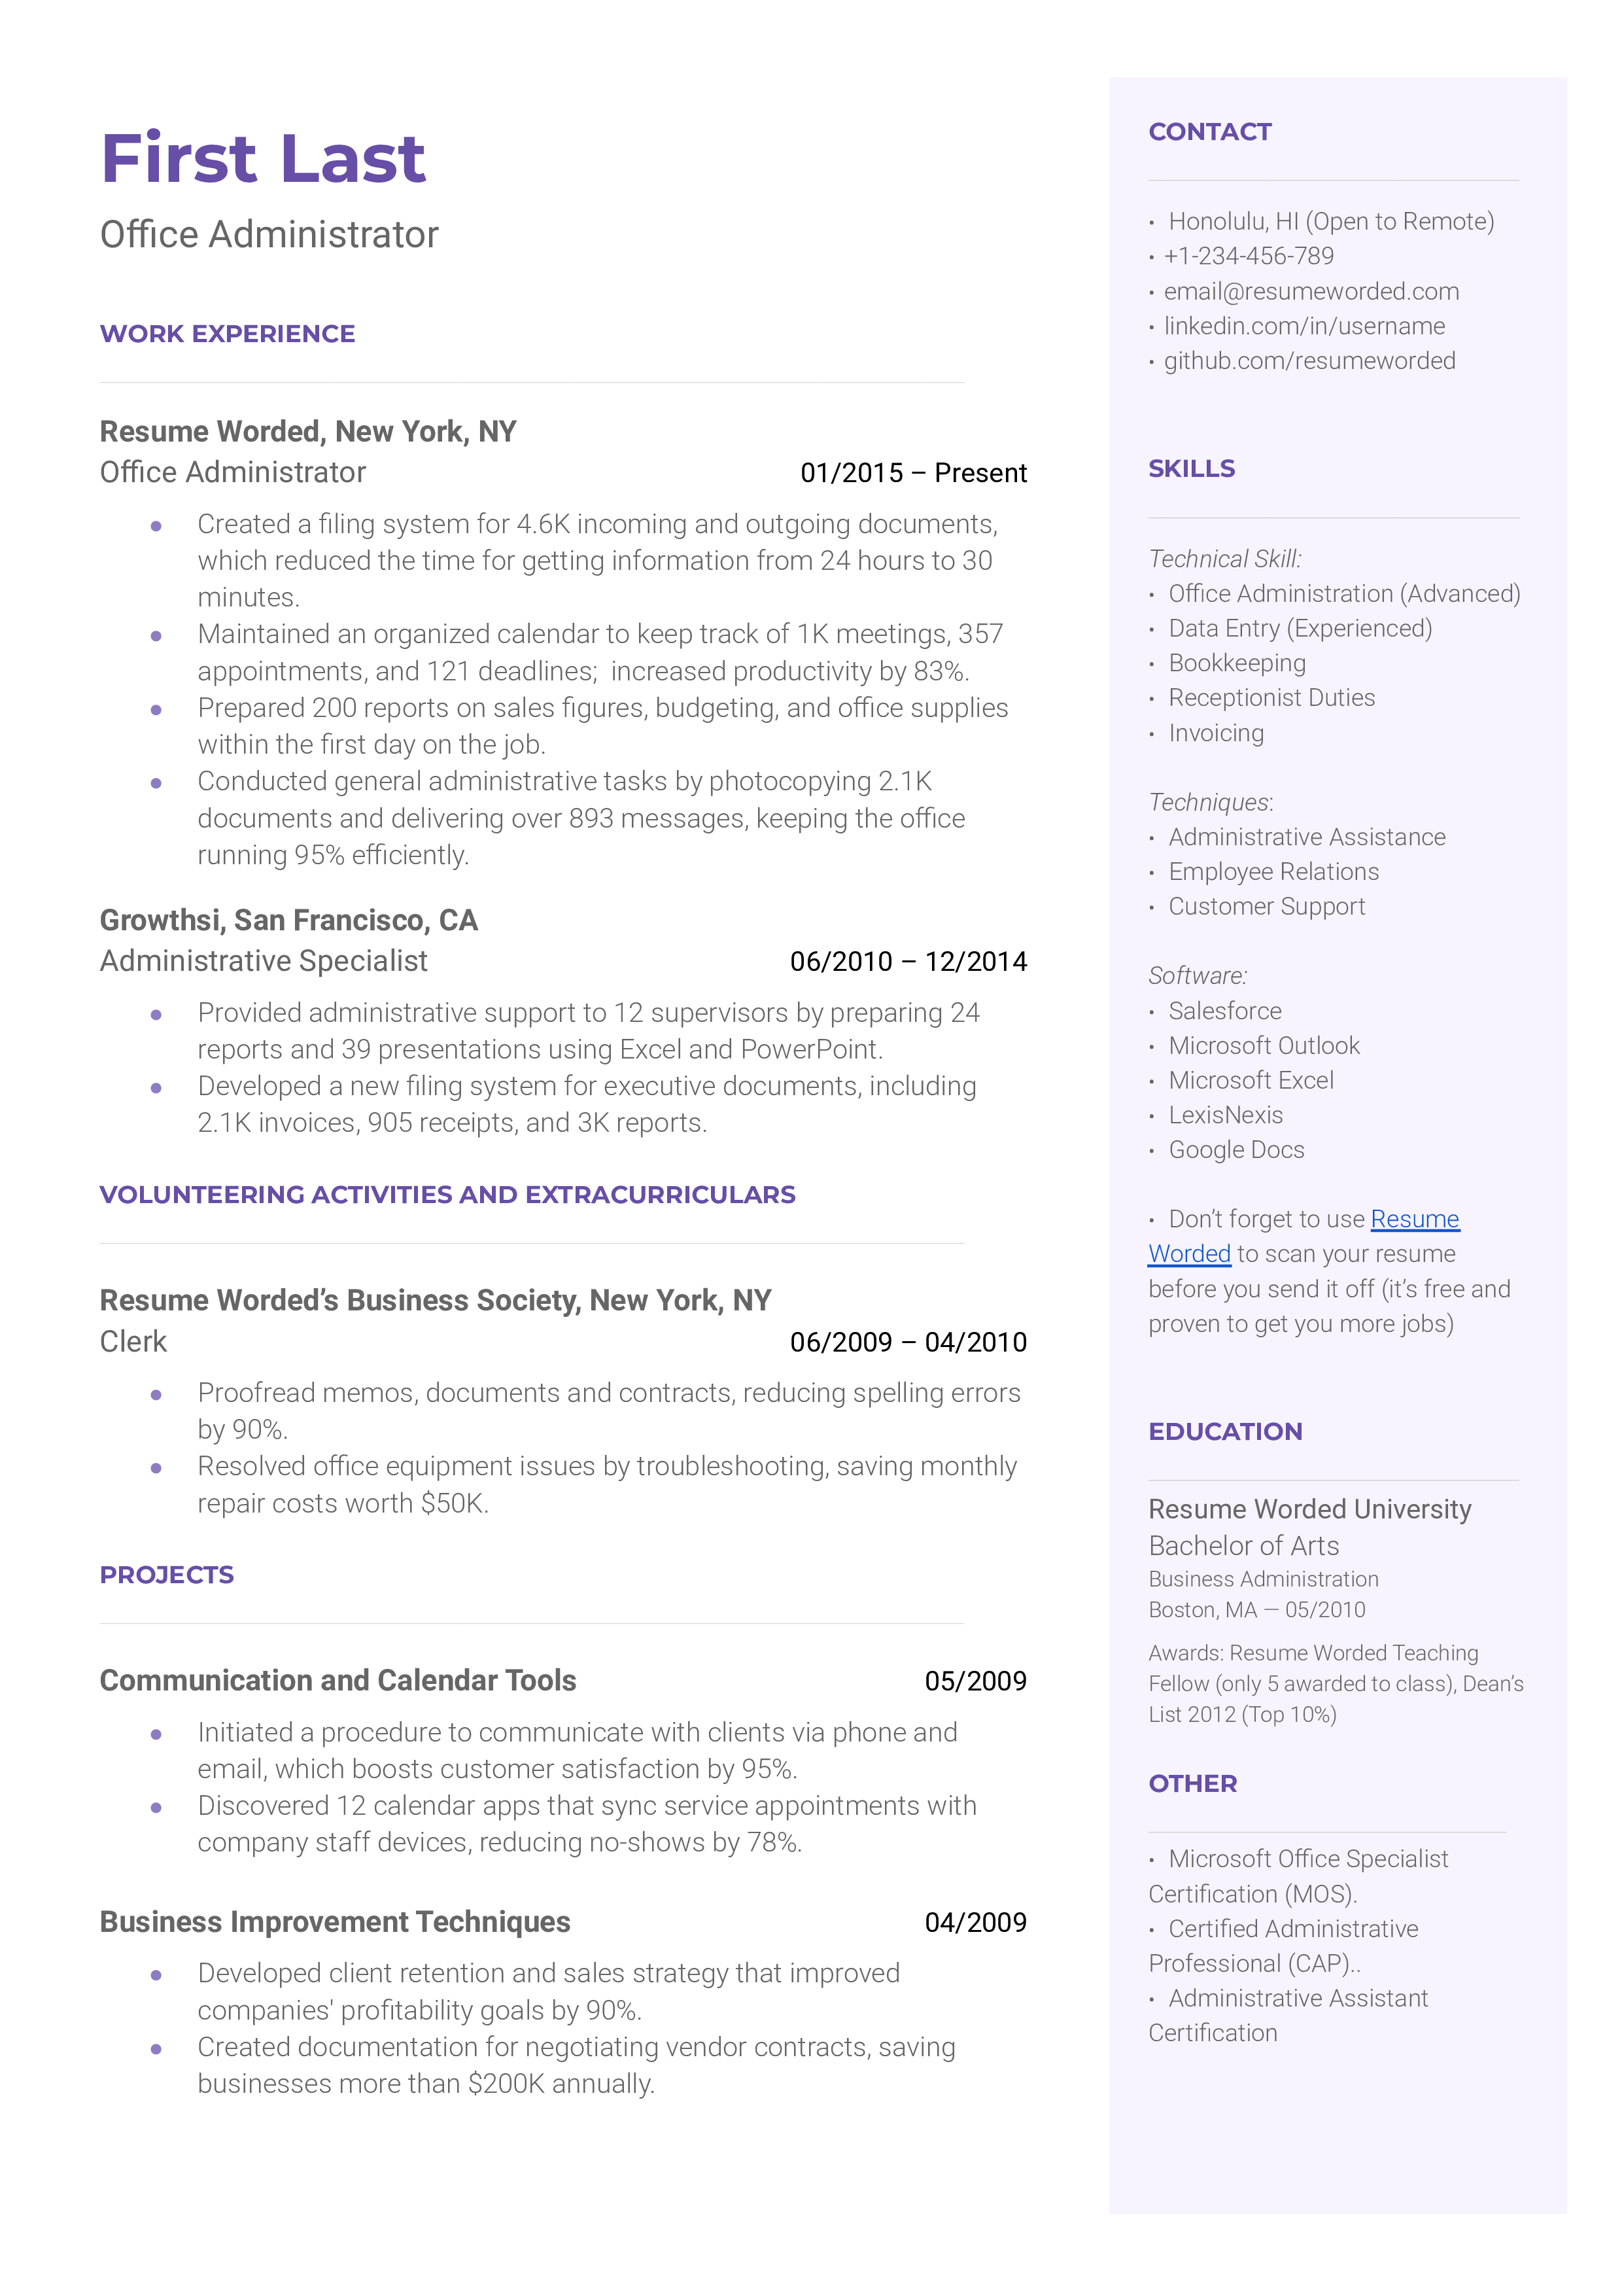 An office administrator's CV displaying varied skills and multitasking examples.